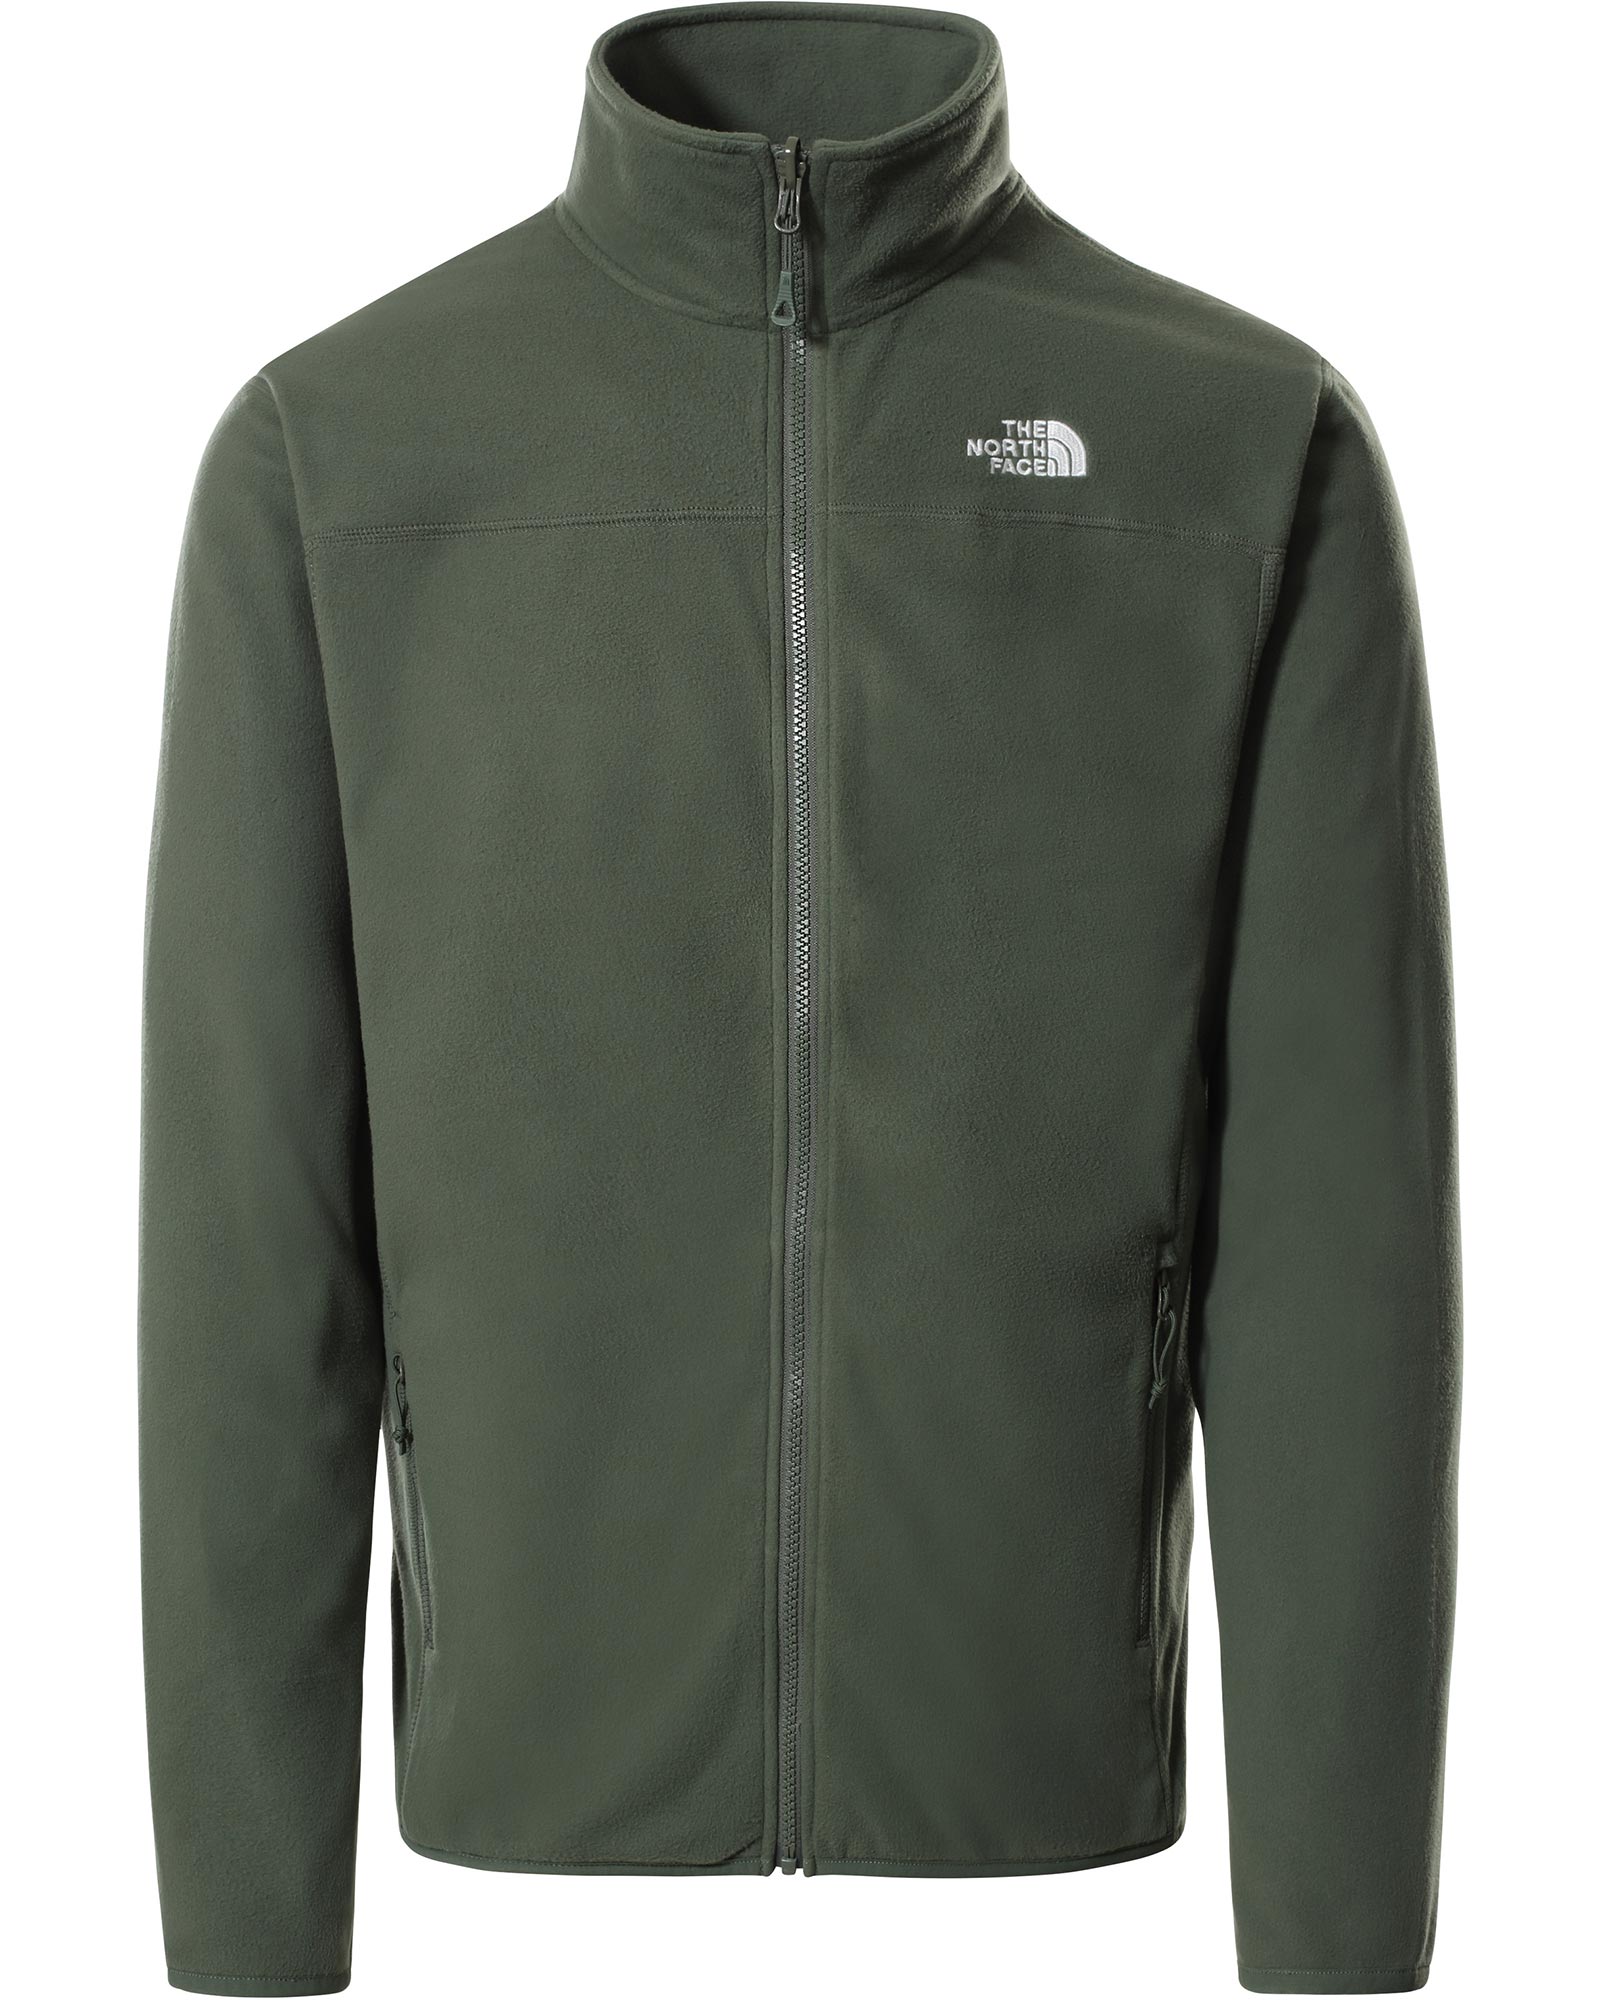 The North Face 100 Glacier Men’s Full Zip Jacket - Thyme XS